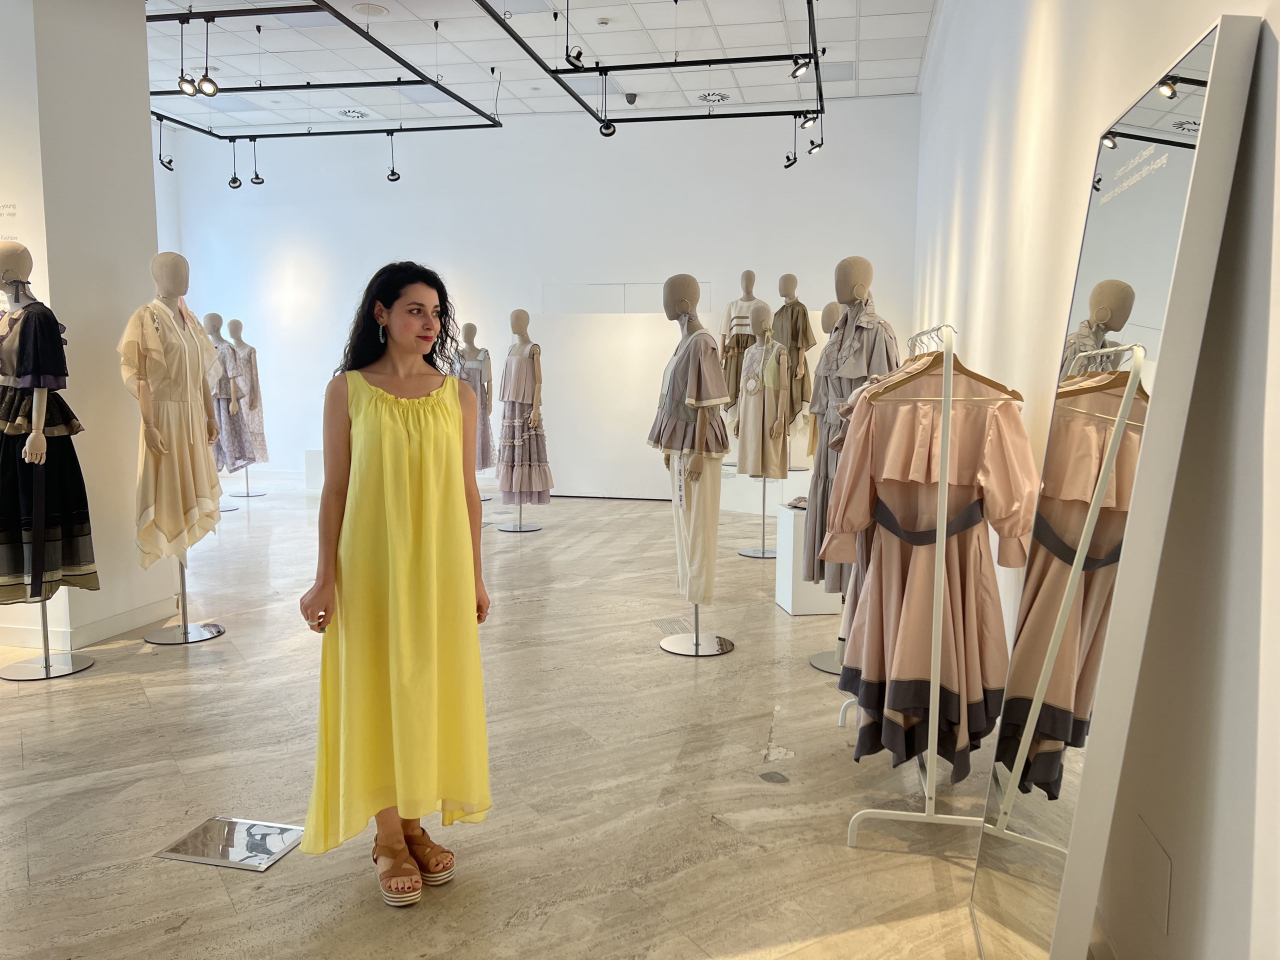 A Spanish visitor tries on a dress of Korean fashion designer Kim A-young in an exhibition space at the Korean Cultural Center of Madrid in June. (The Korean Cultural Center of Madrid)